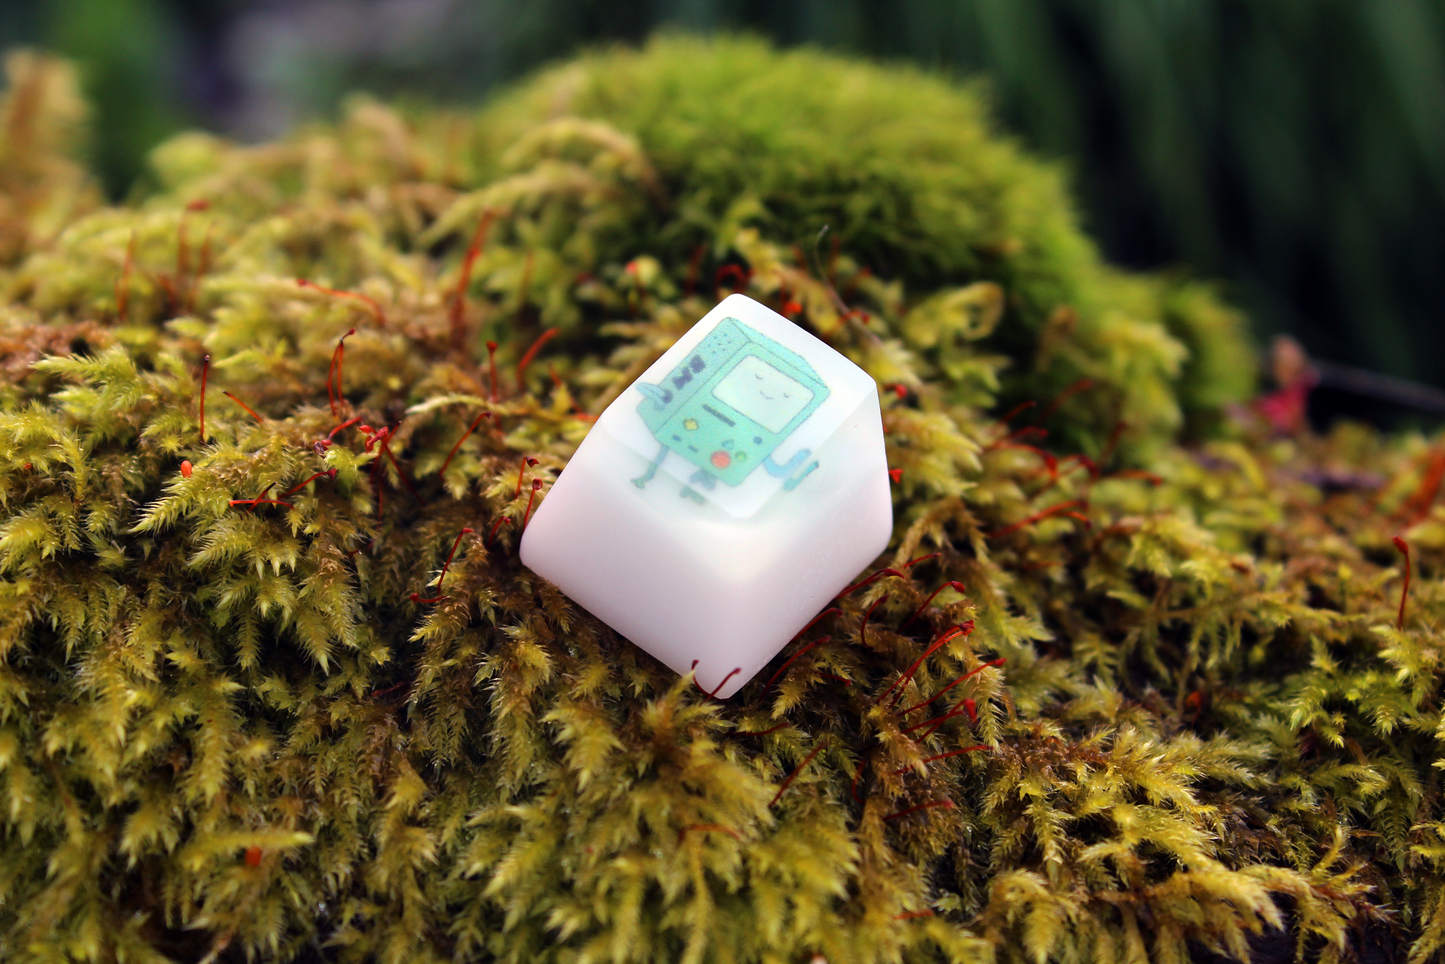 Chaos Caps 1.1 - BMO - PrimeCaps Keycap - Blank and Sculpted Artisan Keycaps for cherry MX mechanical keyboards 